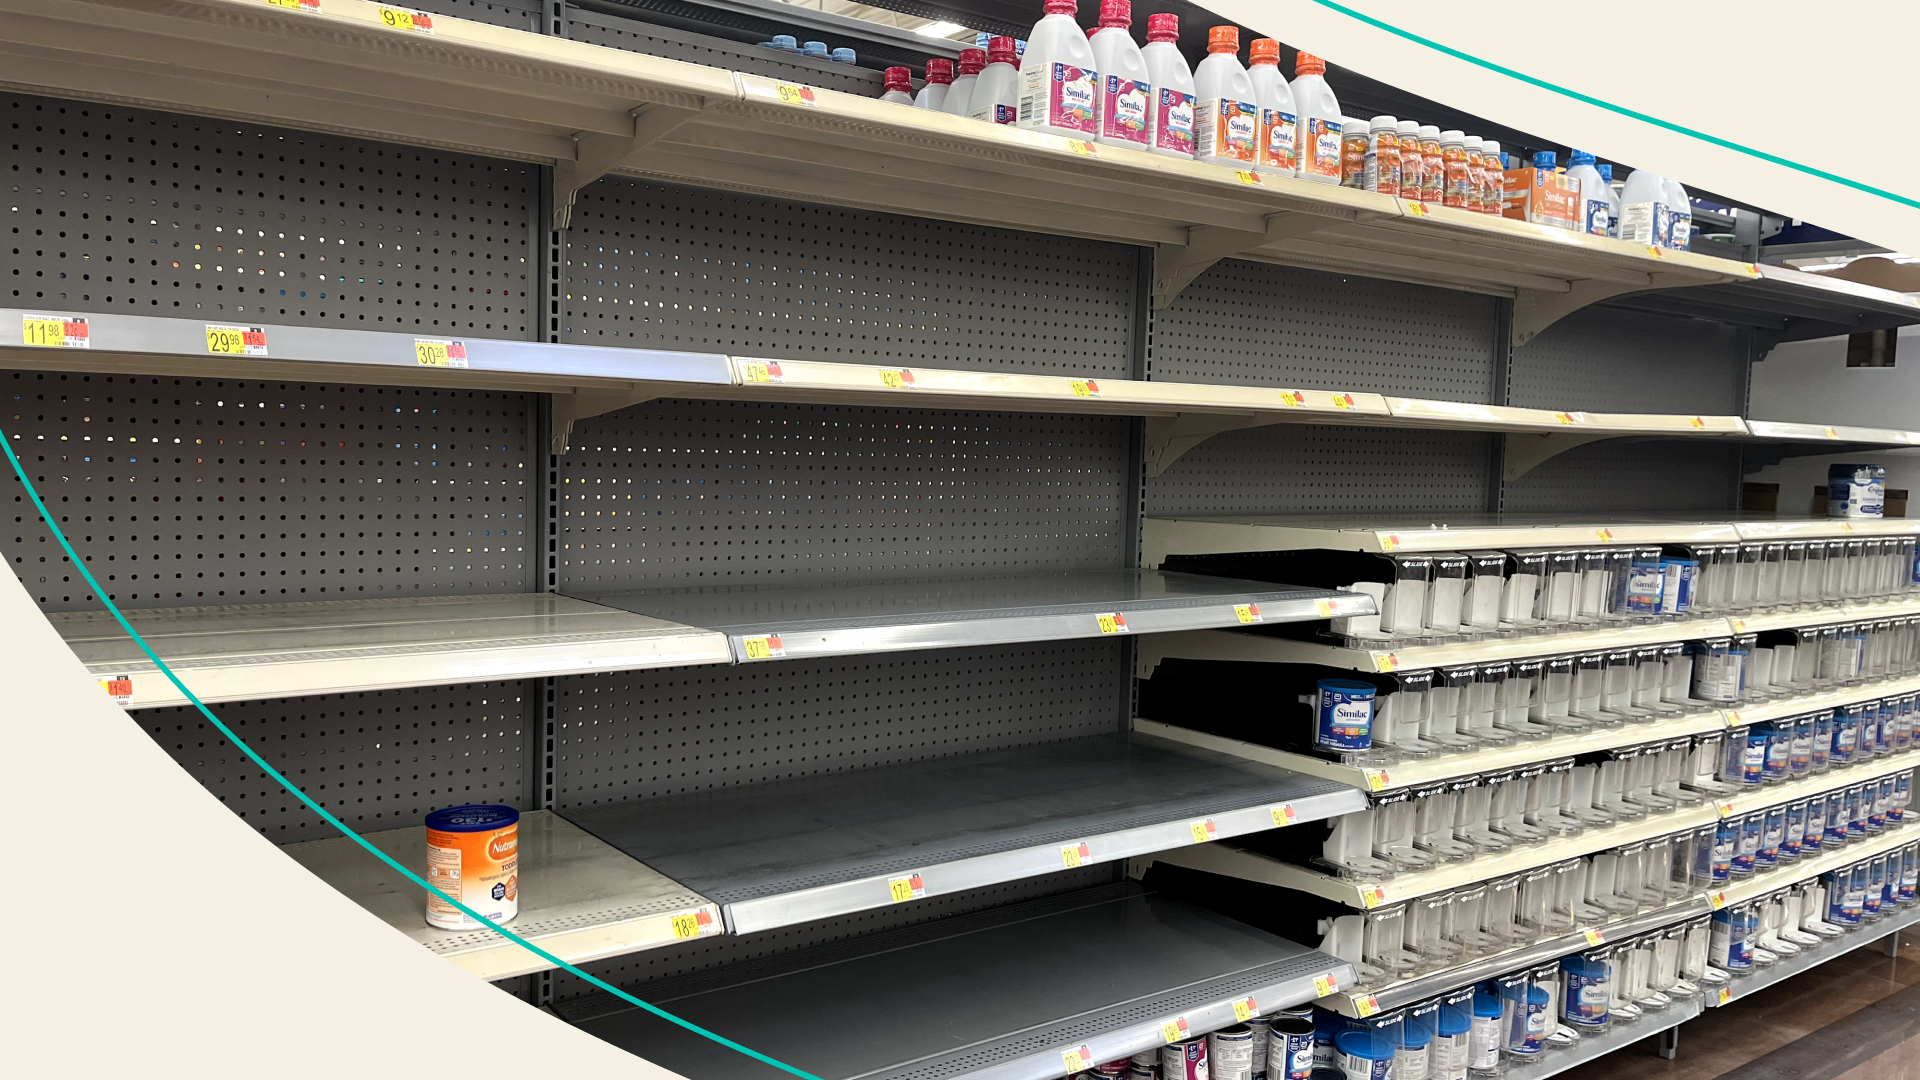 Empty shelves with no baby formula